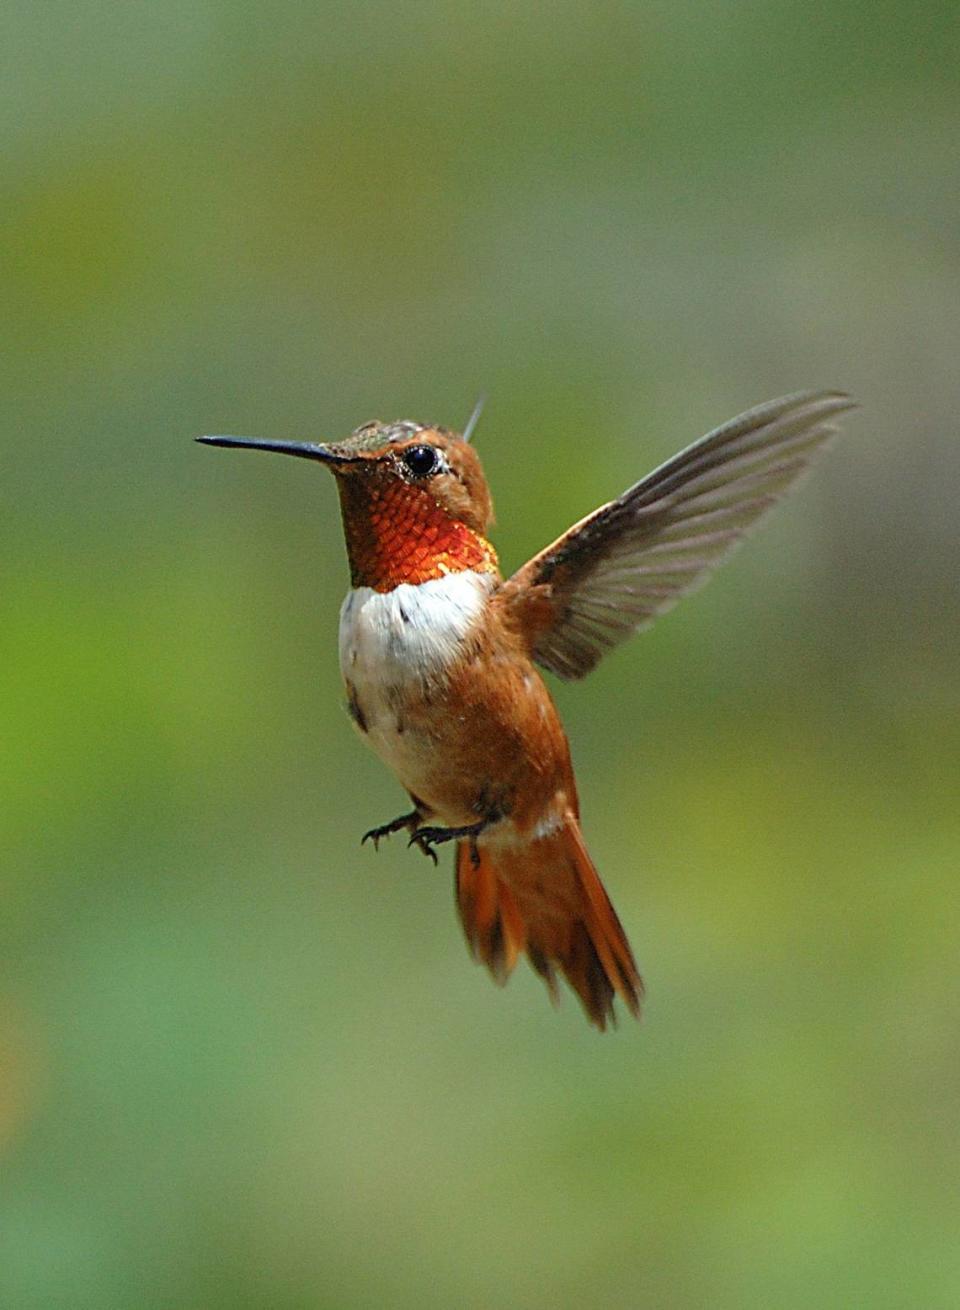 The rufous hummingbird is the most common of the rarer hummingbird species that can be spotted in North Carolina. (Courtesy Shelley Ellis/National Wildlife Federation/MCT)